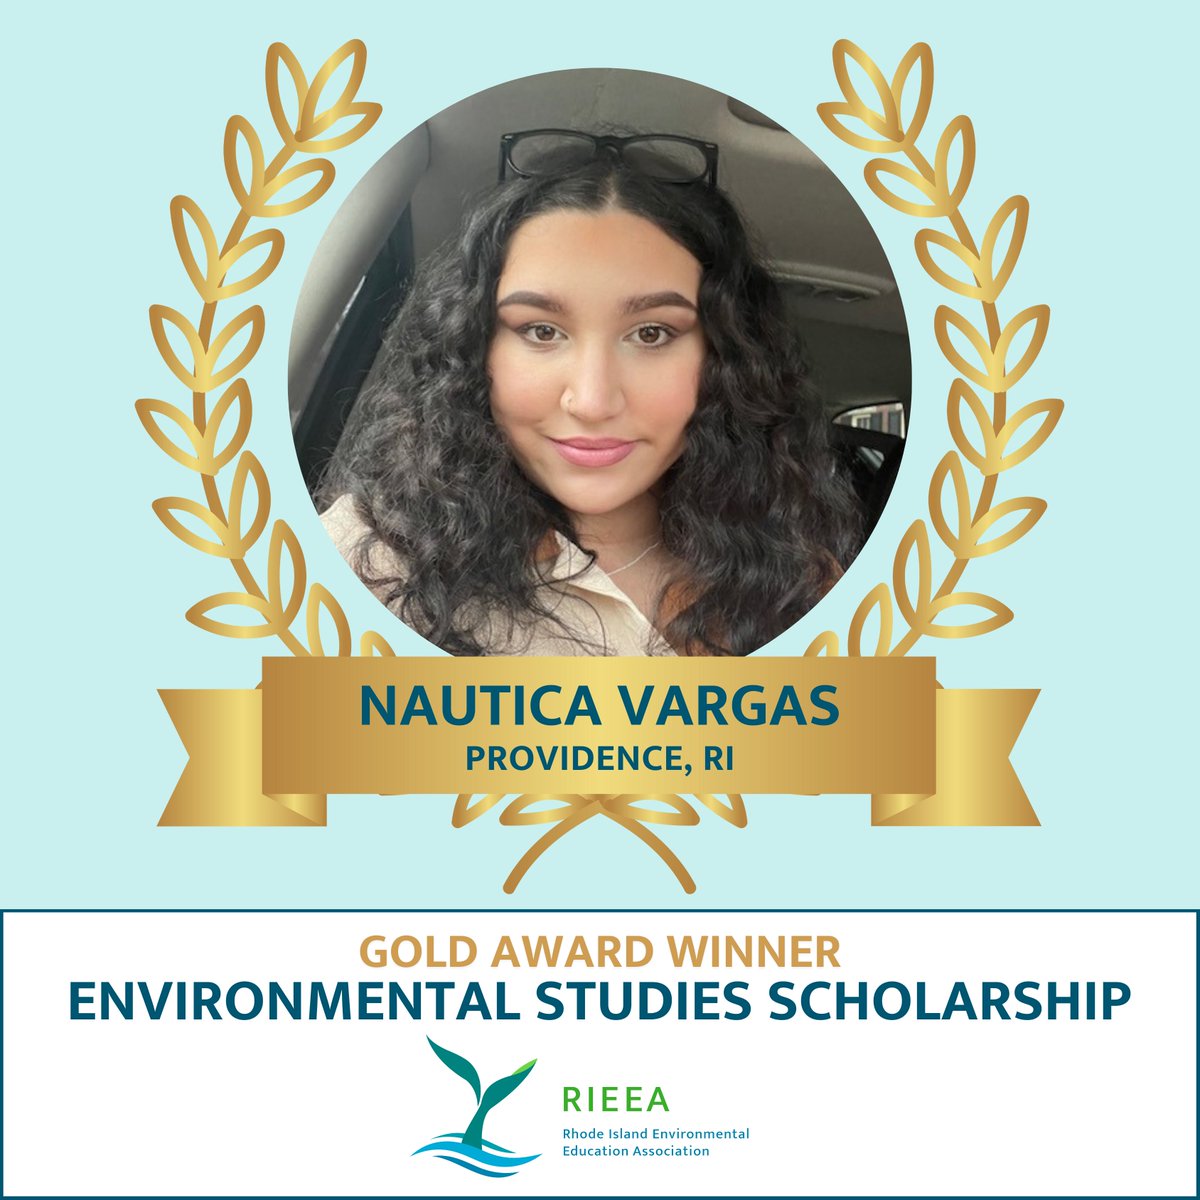 Join us in congratulating RIEEA scholarship winner Nautica Vargas! Nautica is currently pursuing a degree in Environmental Studies at @RICNews, while working part time as an educator with the @WRWC! She lives in Providence with her 3-year-old son. Congratulations, Nautica!🎊